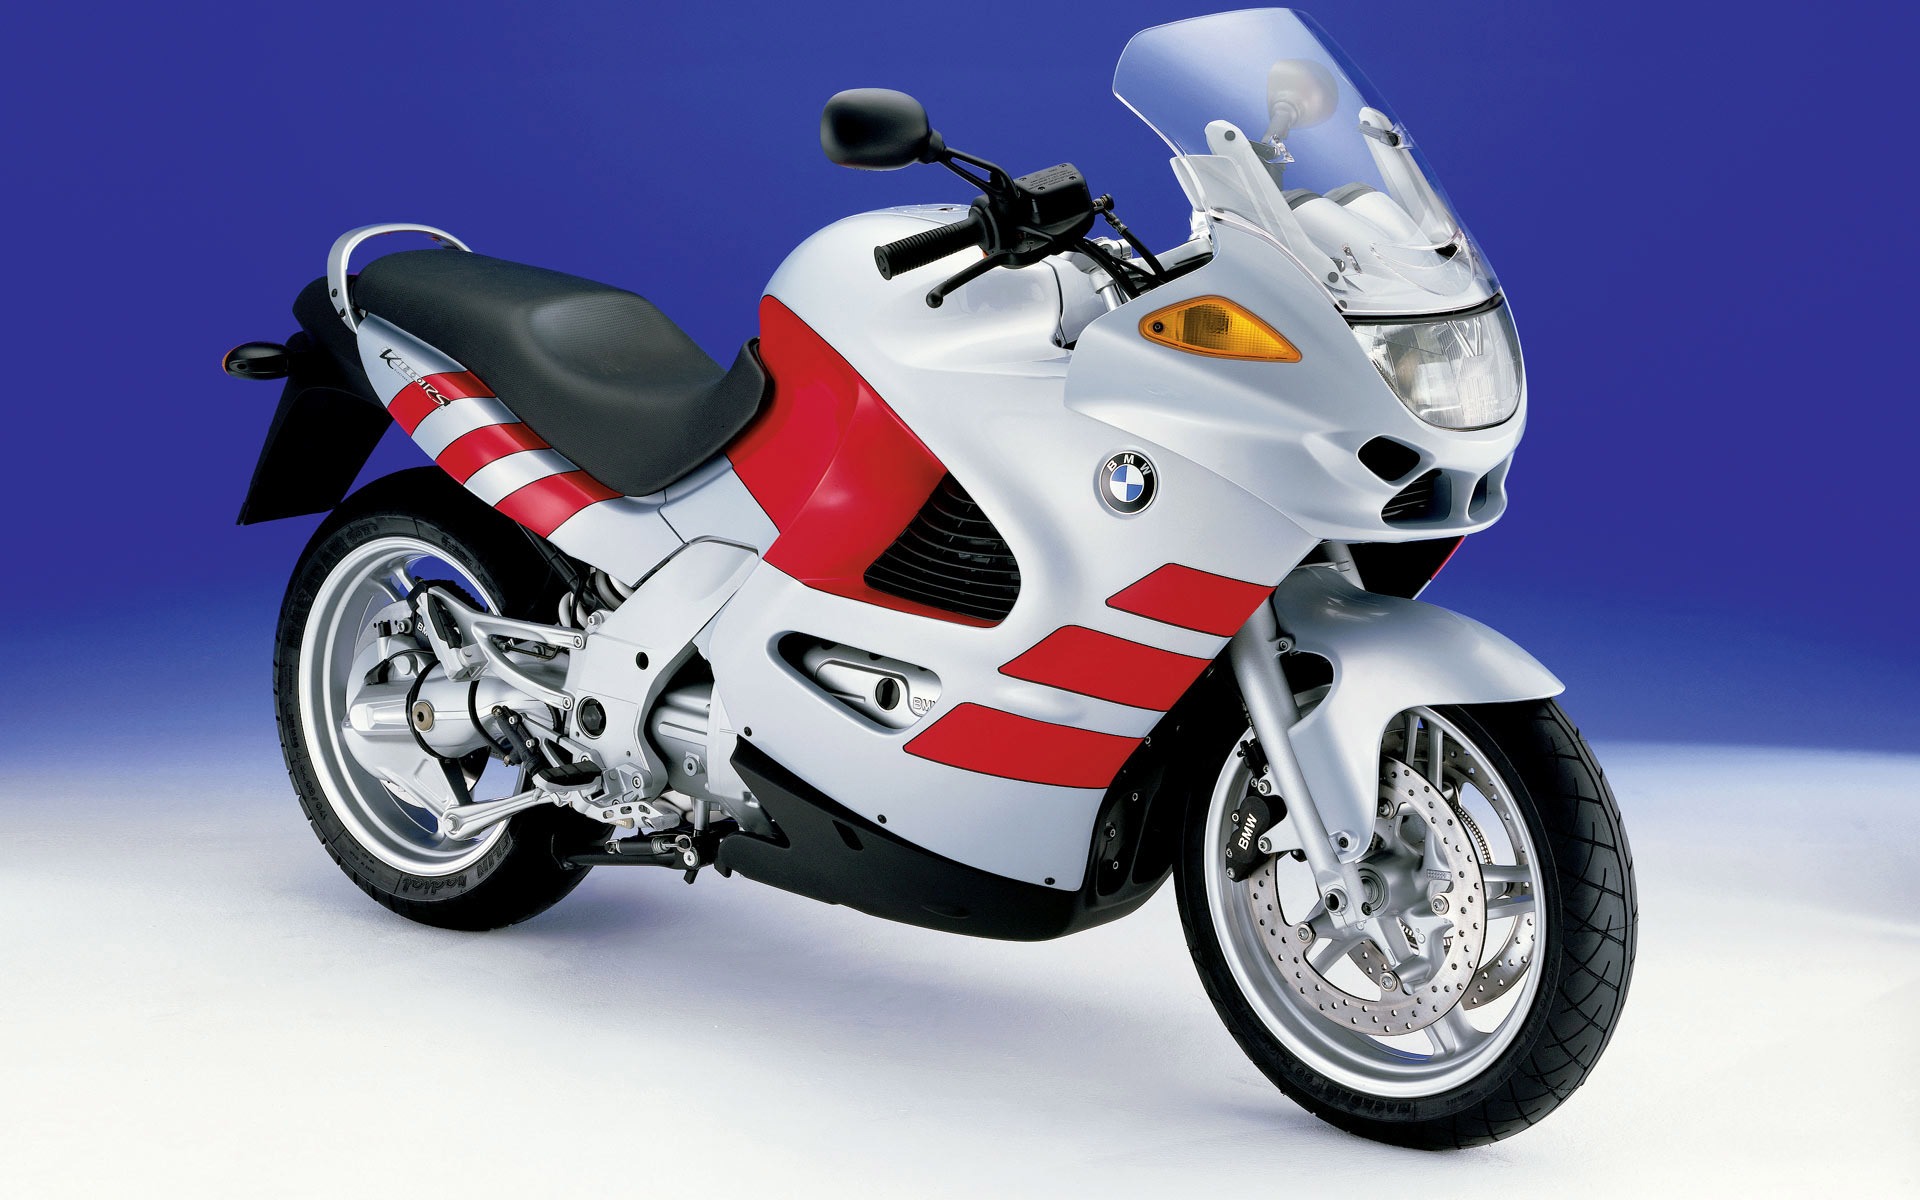 BMW motorcycle wallpapers (1) #1 - 1920x1200